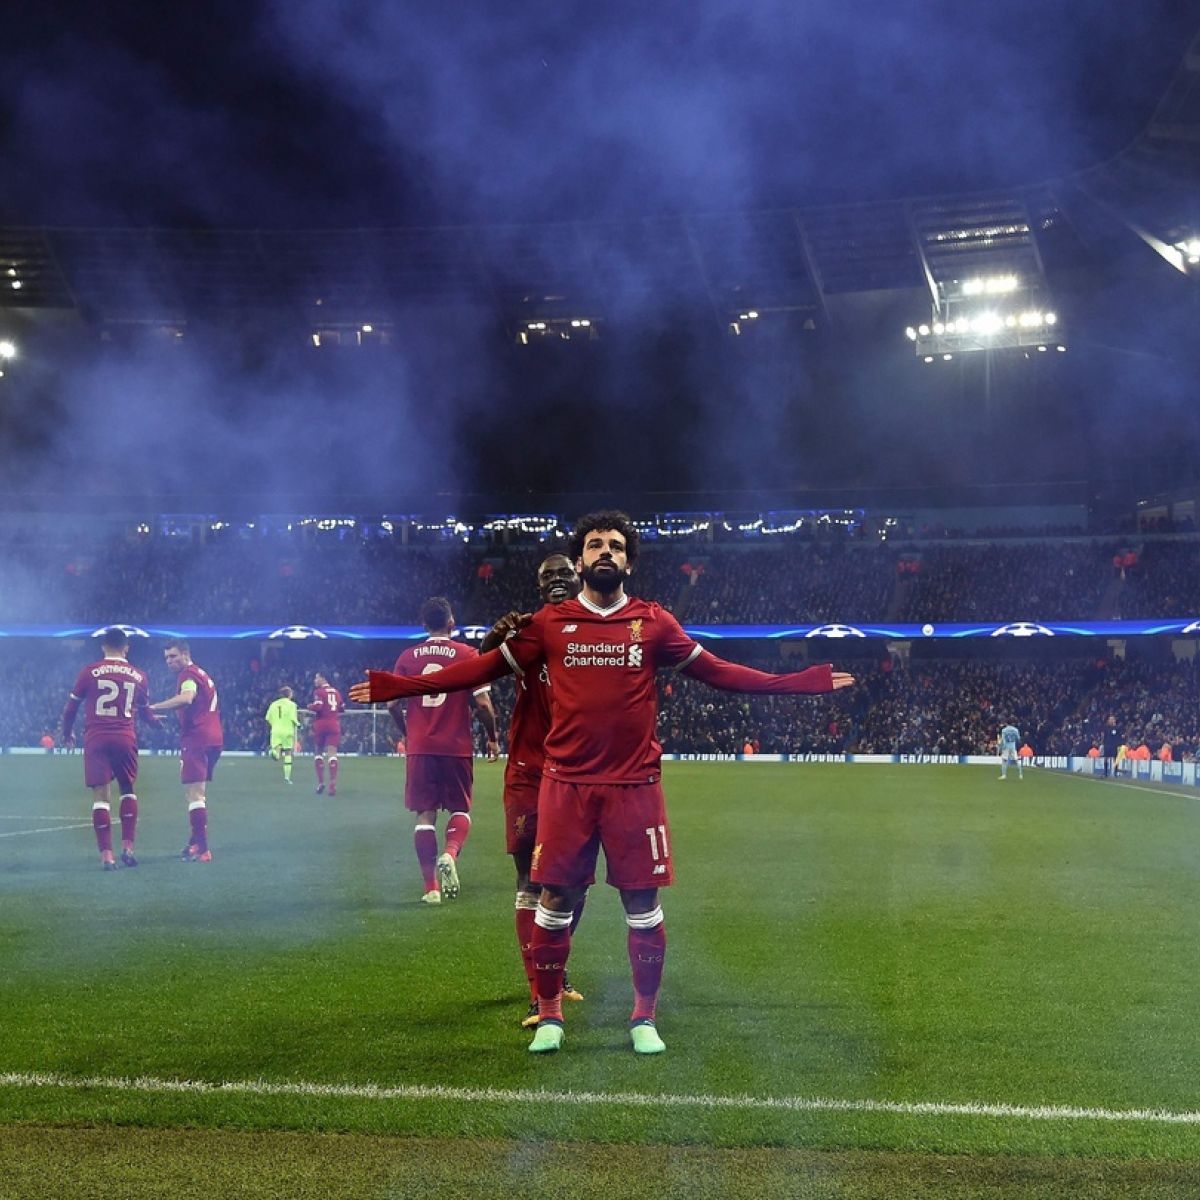 In the 2017/18 Champions League campaign, Salah recorded 10 goals and 5 assists in 13 appearances. He was vital in the knockout stages and helped Liverpool reach the final. He broke the centurion city team and had one of the greatest semi-final performances ever against Roma.